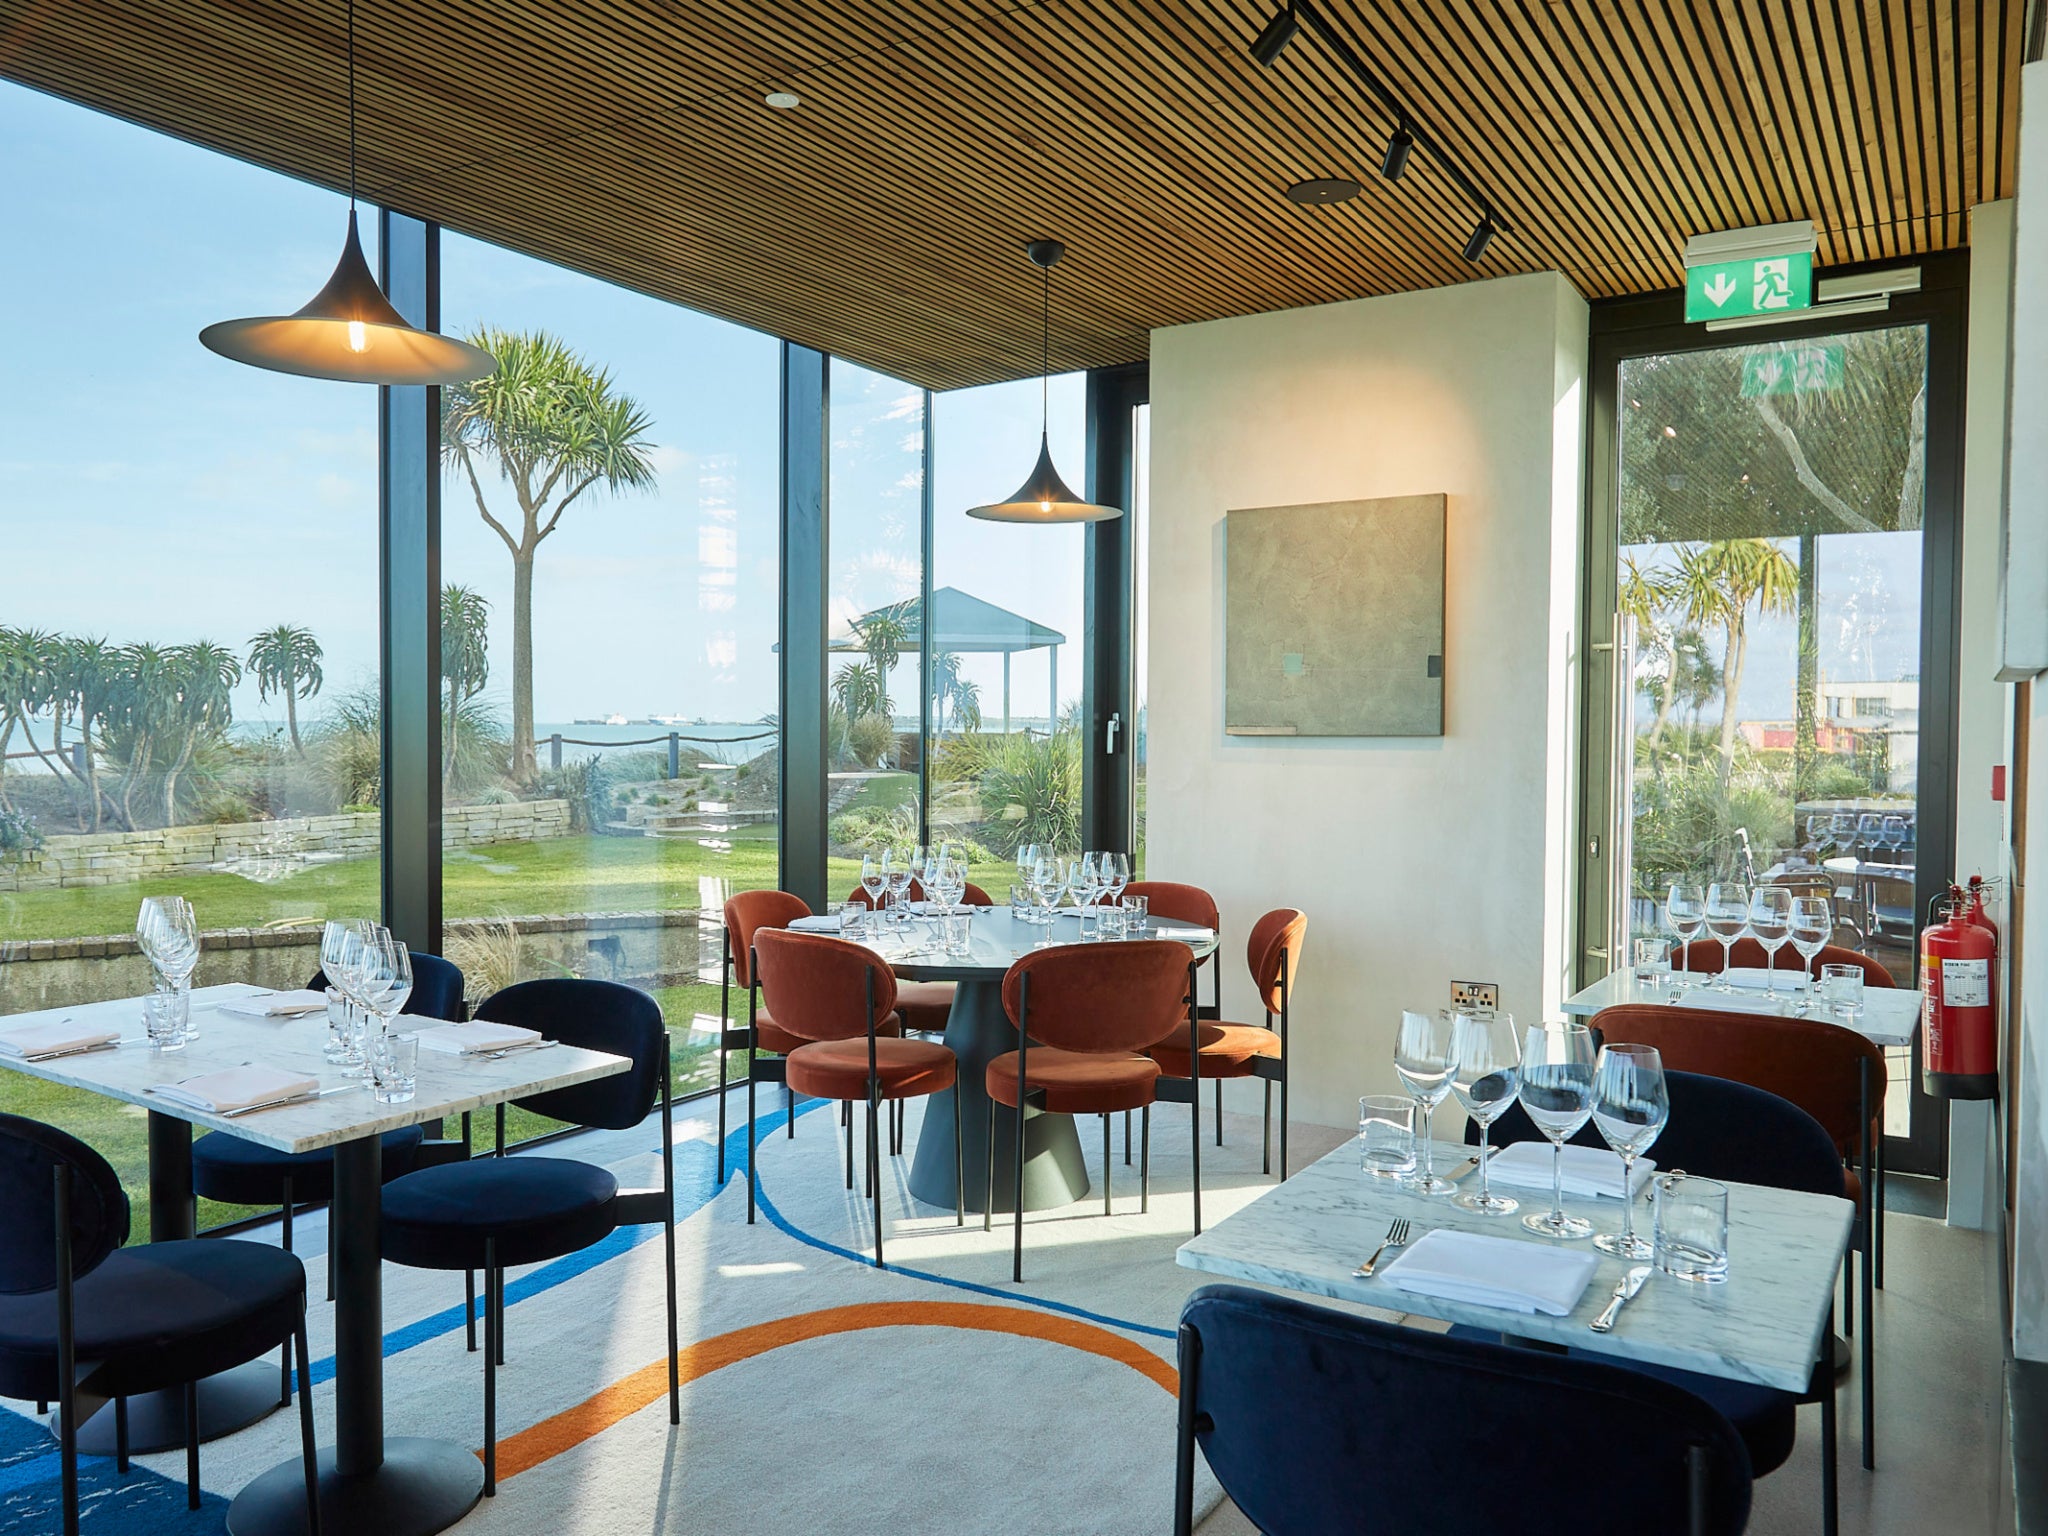 The hotel’s new restaurant adds another level of cool to proceedings